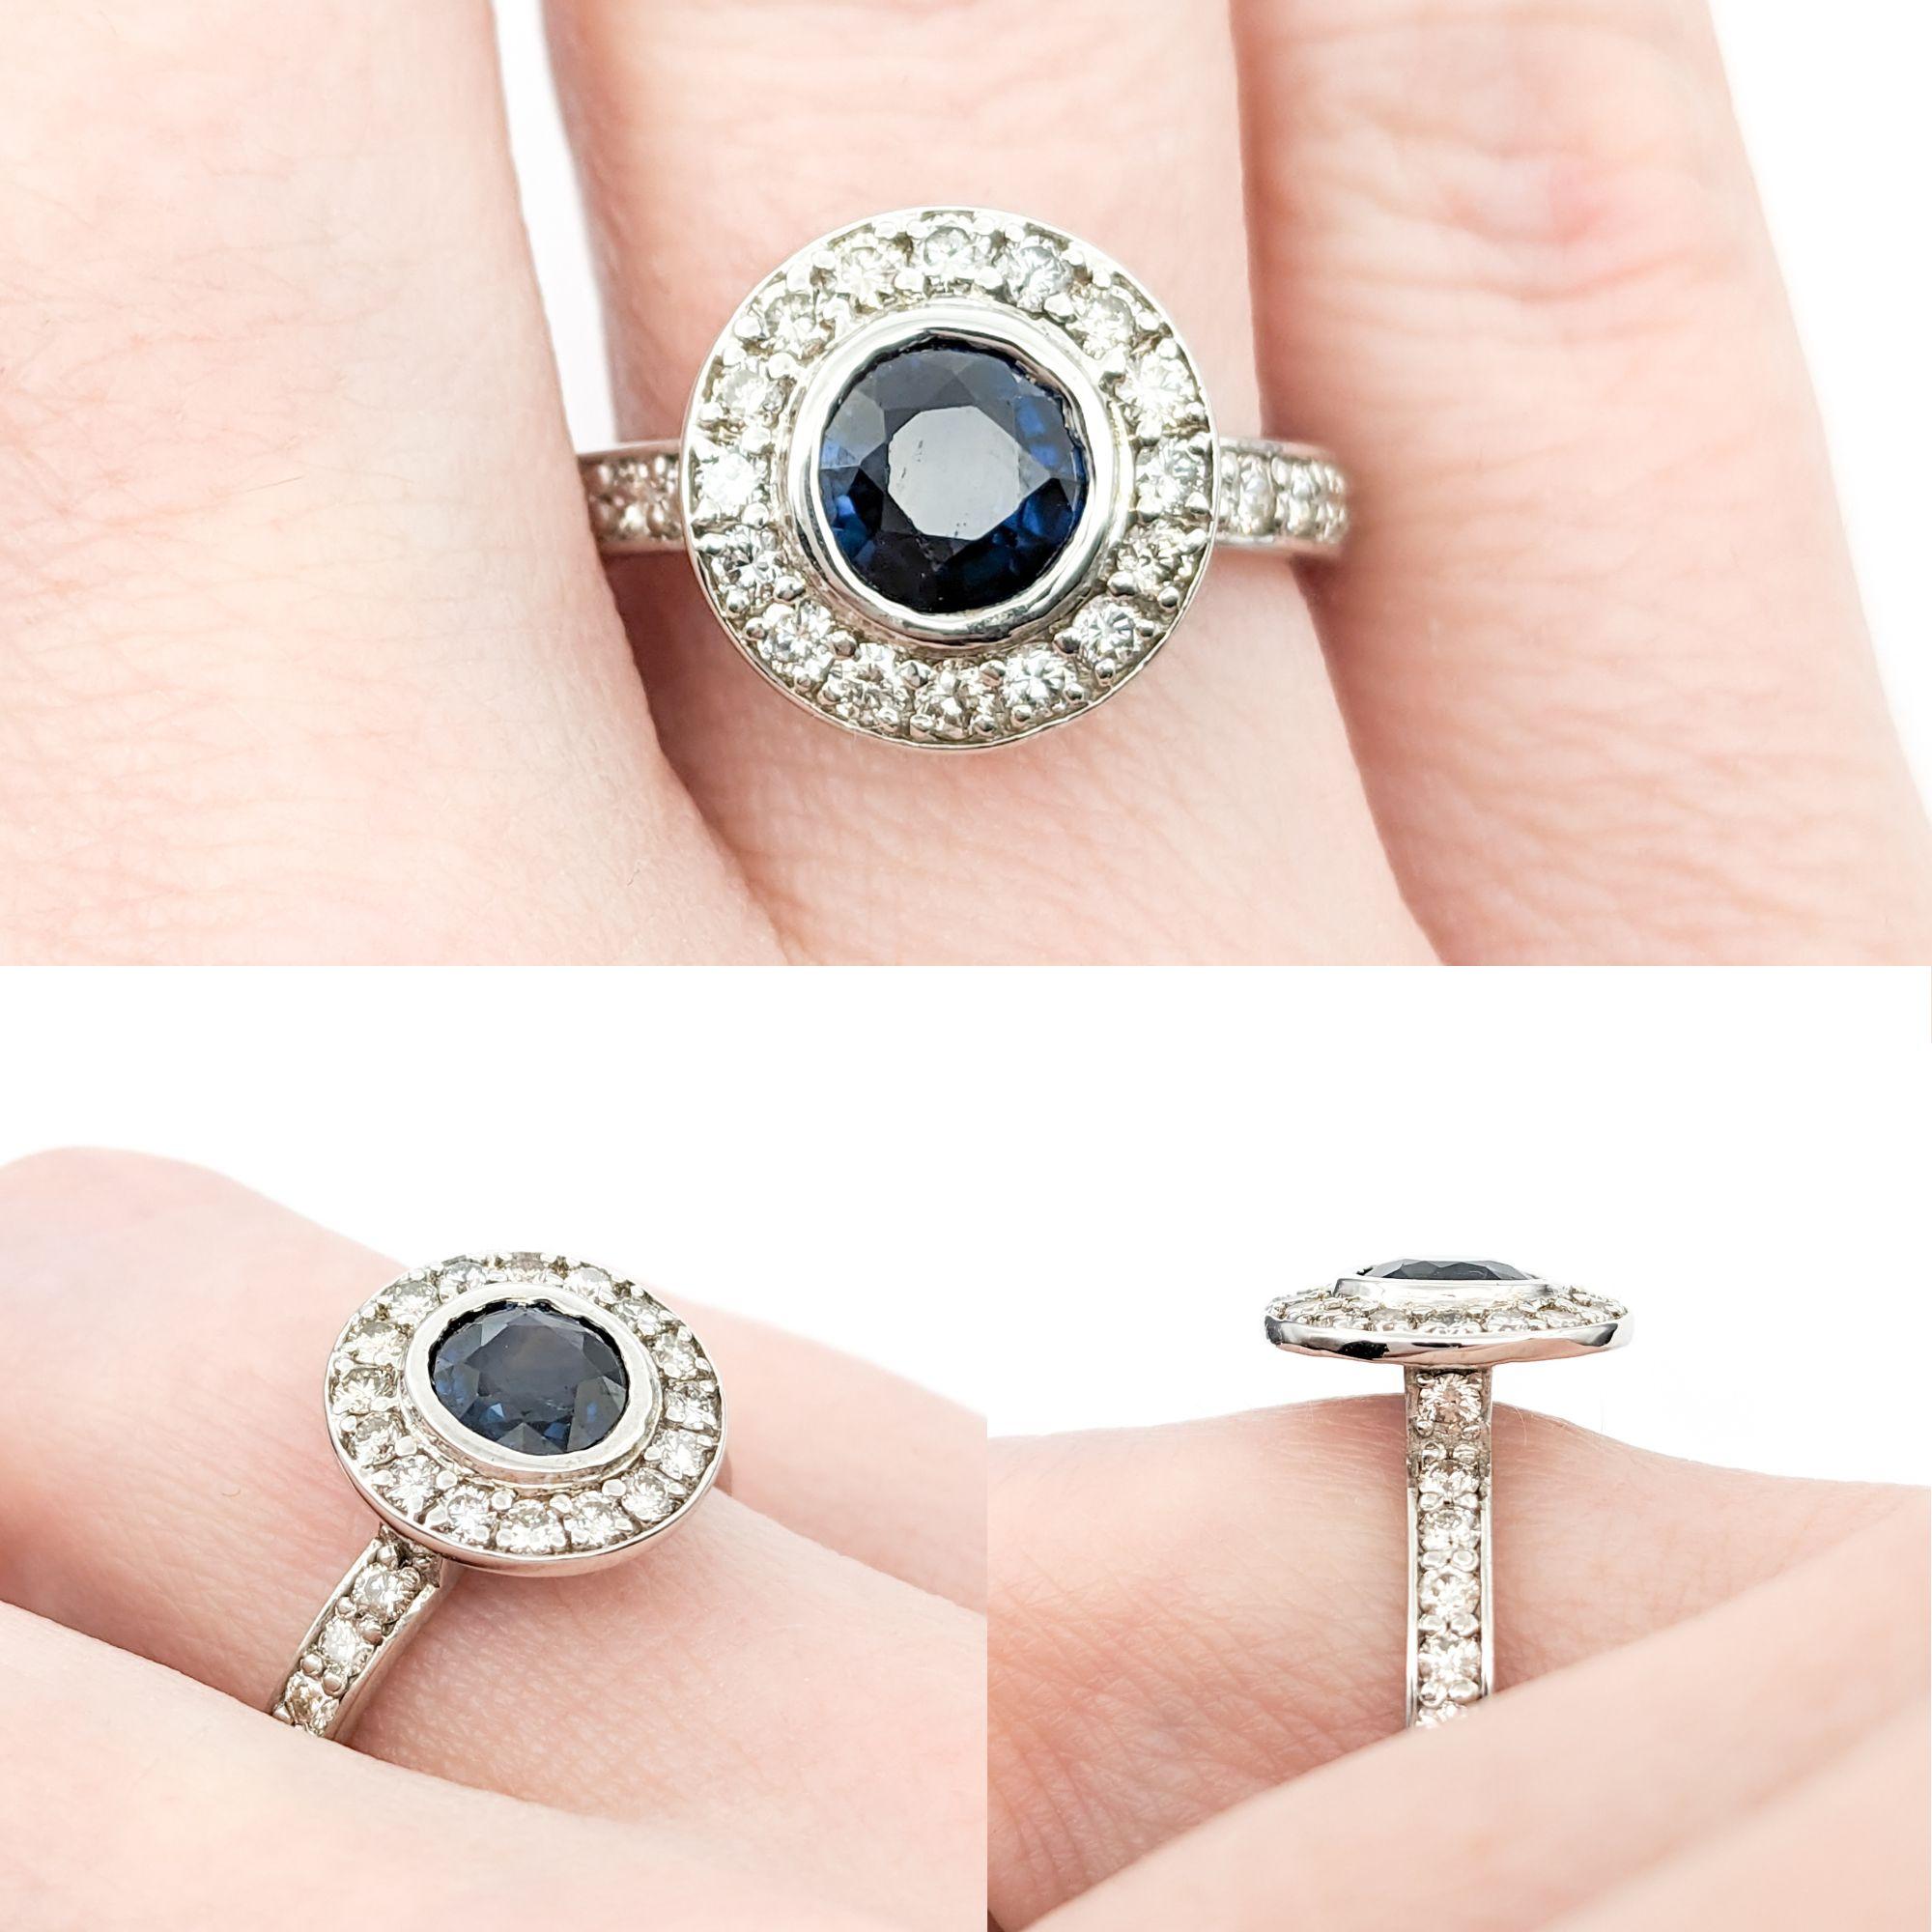 1.20ct Blue Sapphire & 1ctw Diamond Ring In White Gold

Introducing a stunning ring crafted in 14kt white gold, featuring a 1.20ct Sapphire centerpiece alongside 1.00ctw of round diamonds. The diamonds, noted for their SI-I clarity and near